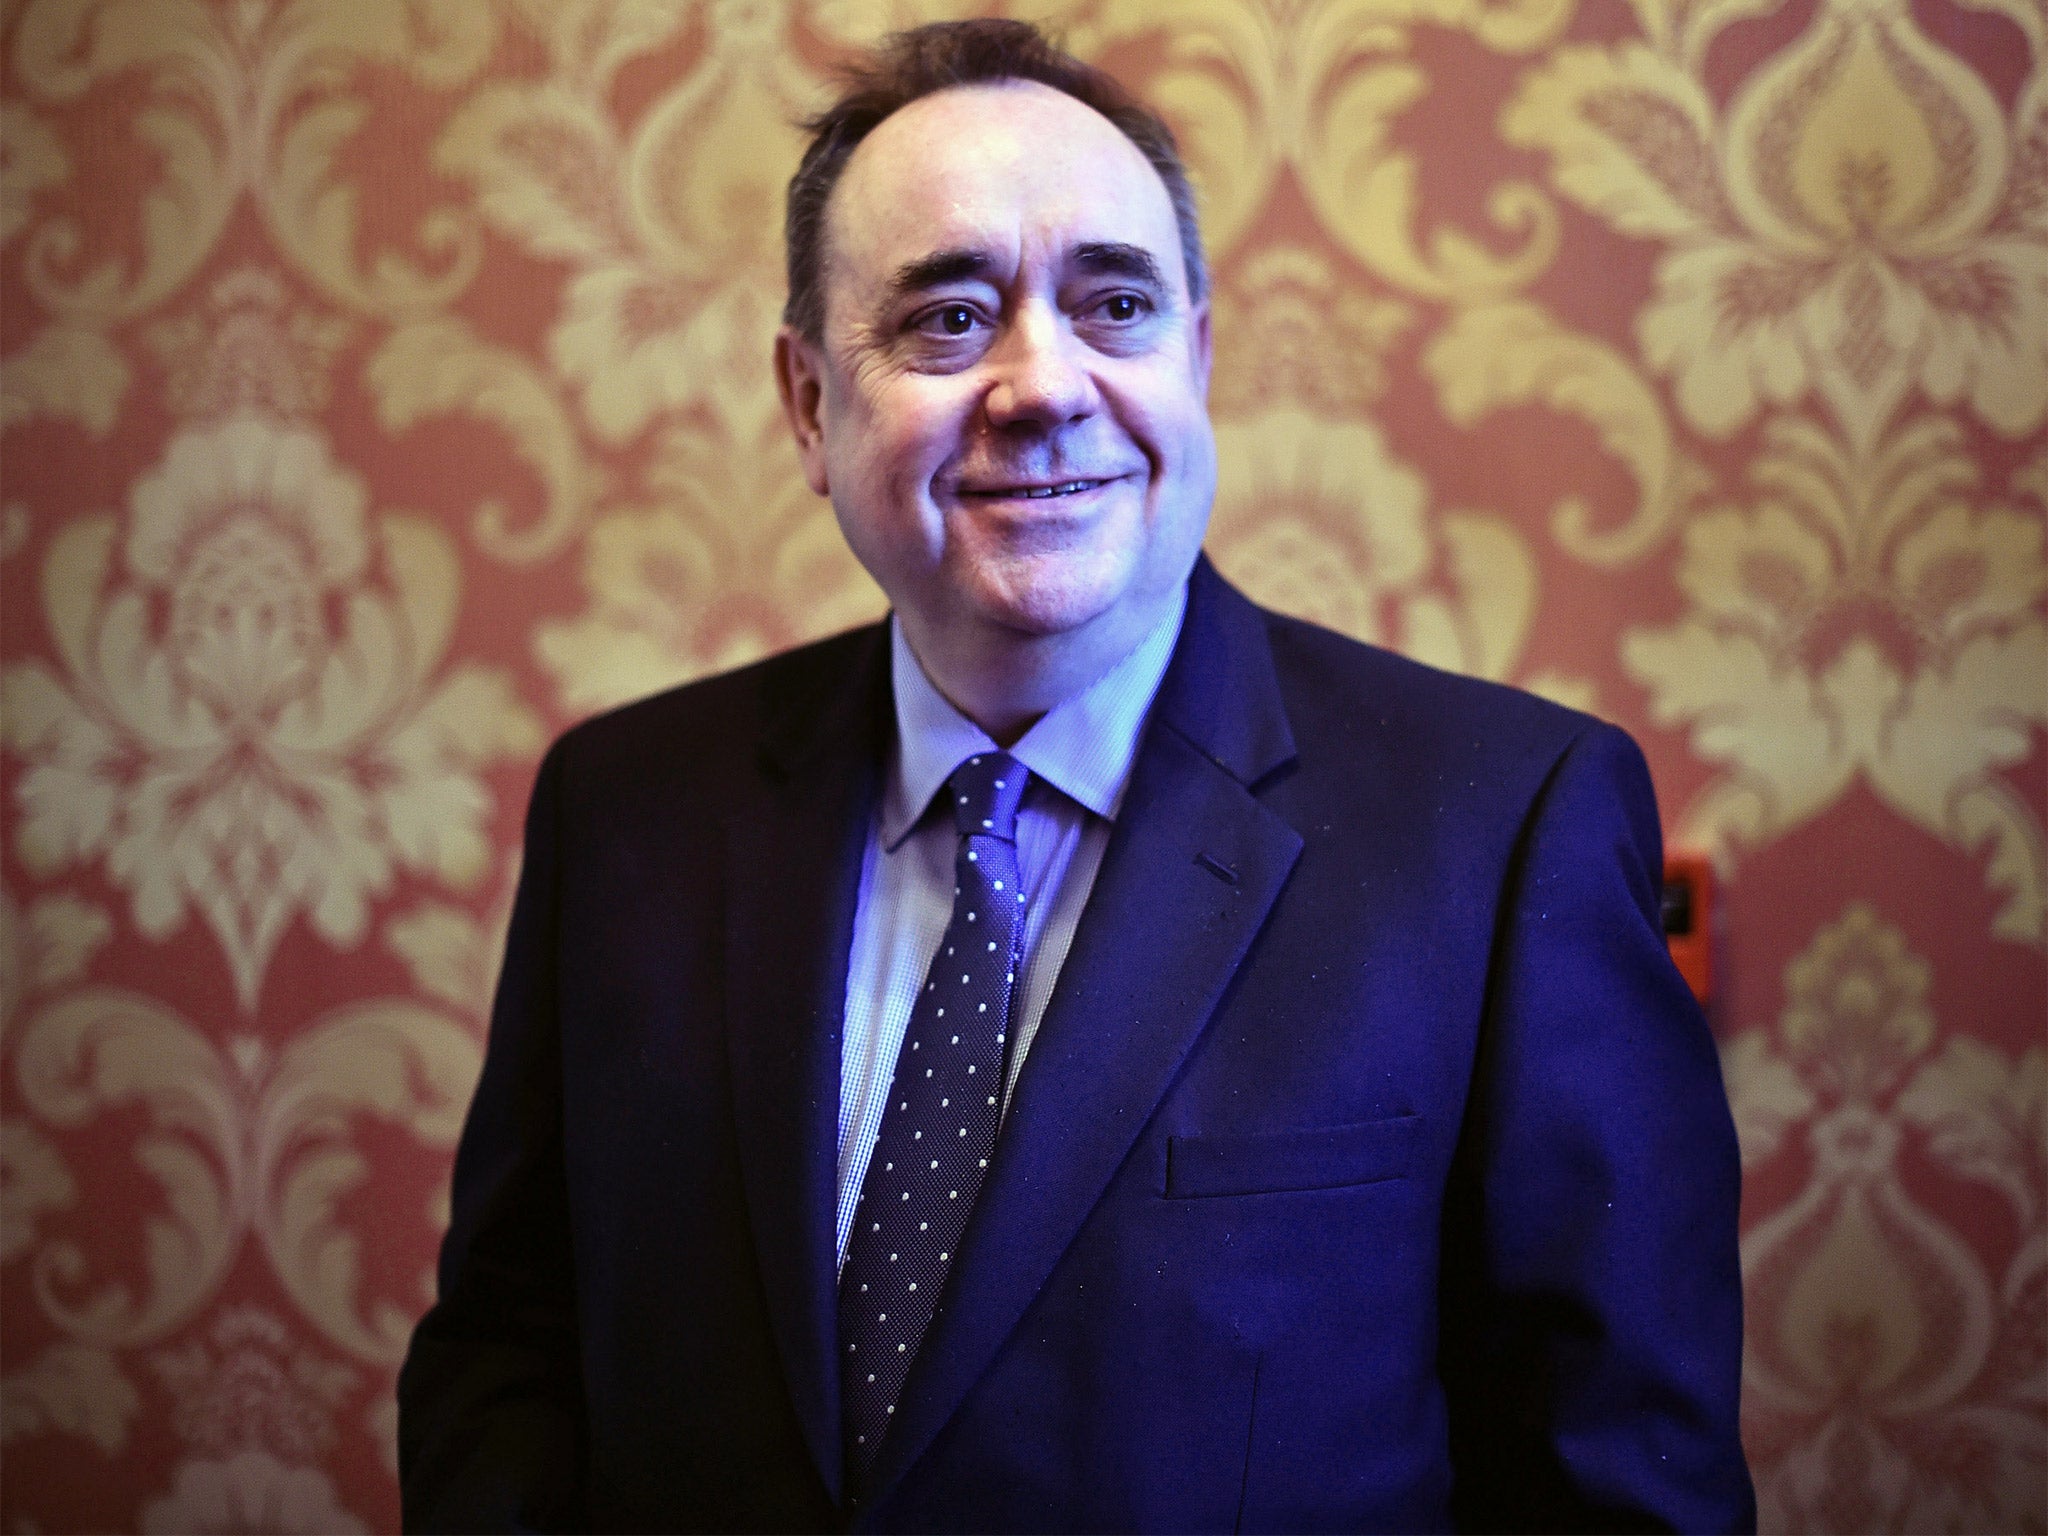 Alex Salmond’s newspaper article will break the SNP and Labour silence on ‘independence day’